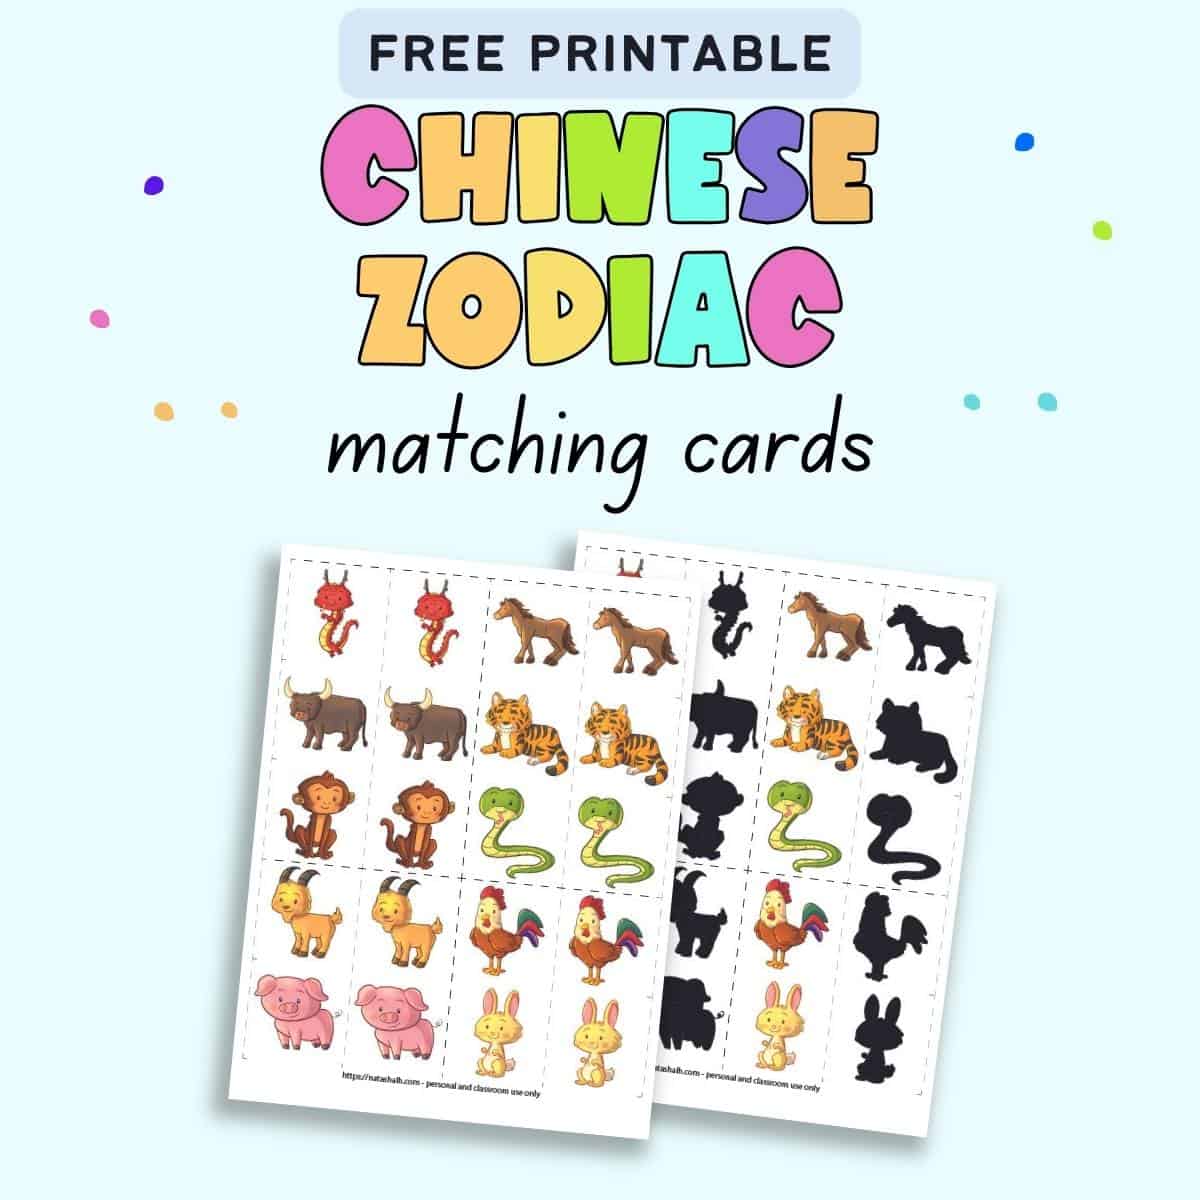 Text "free printable chinese zodiac matching cards" with  preview of two page of printable matching cards